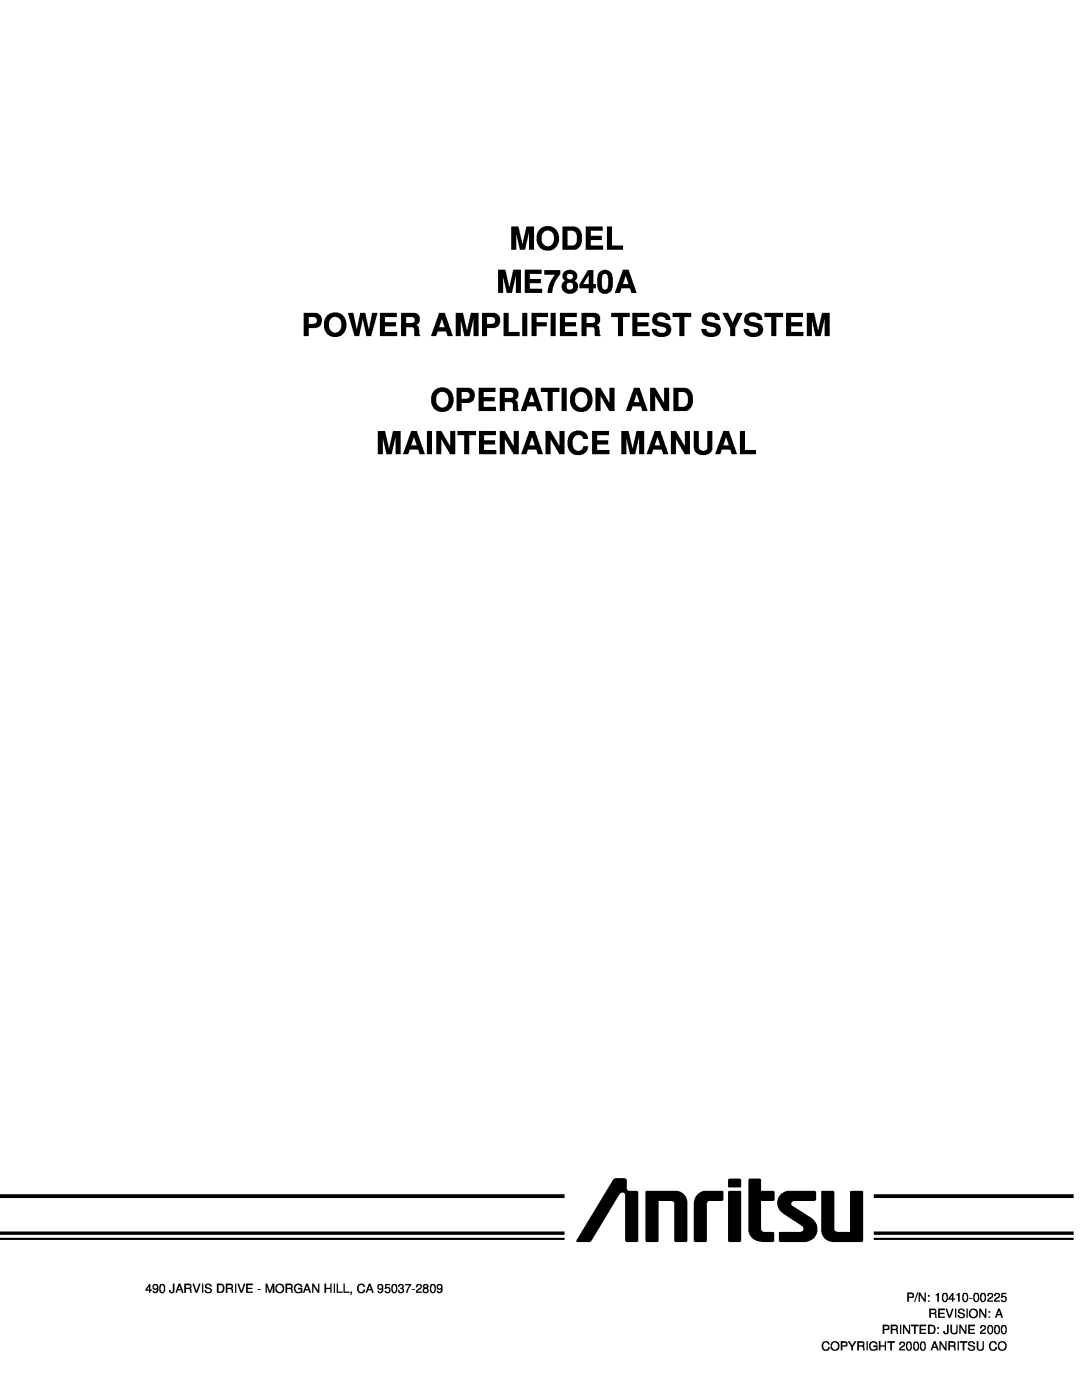 Anritsu manual MODEL ME7840A POWER AMPLIFIER TEST SYSTEM, Operation And Maintenance Manual 